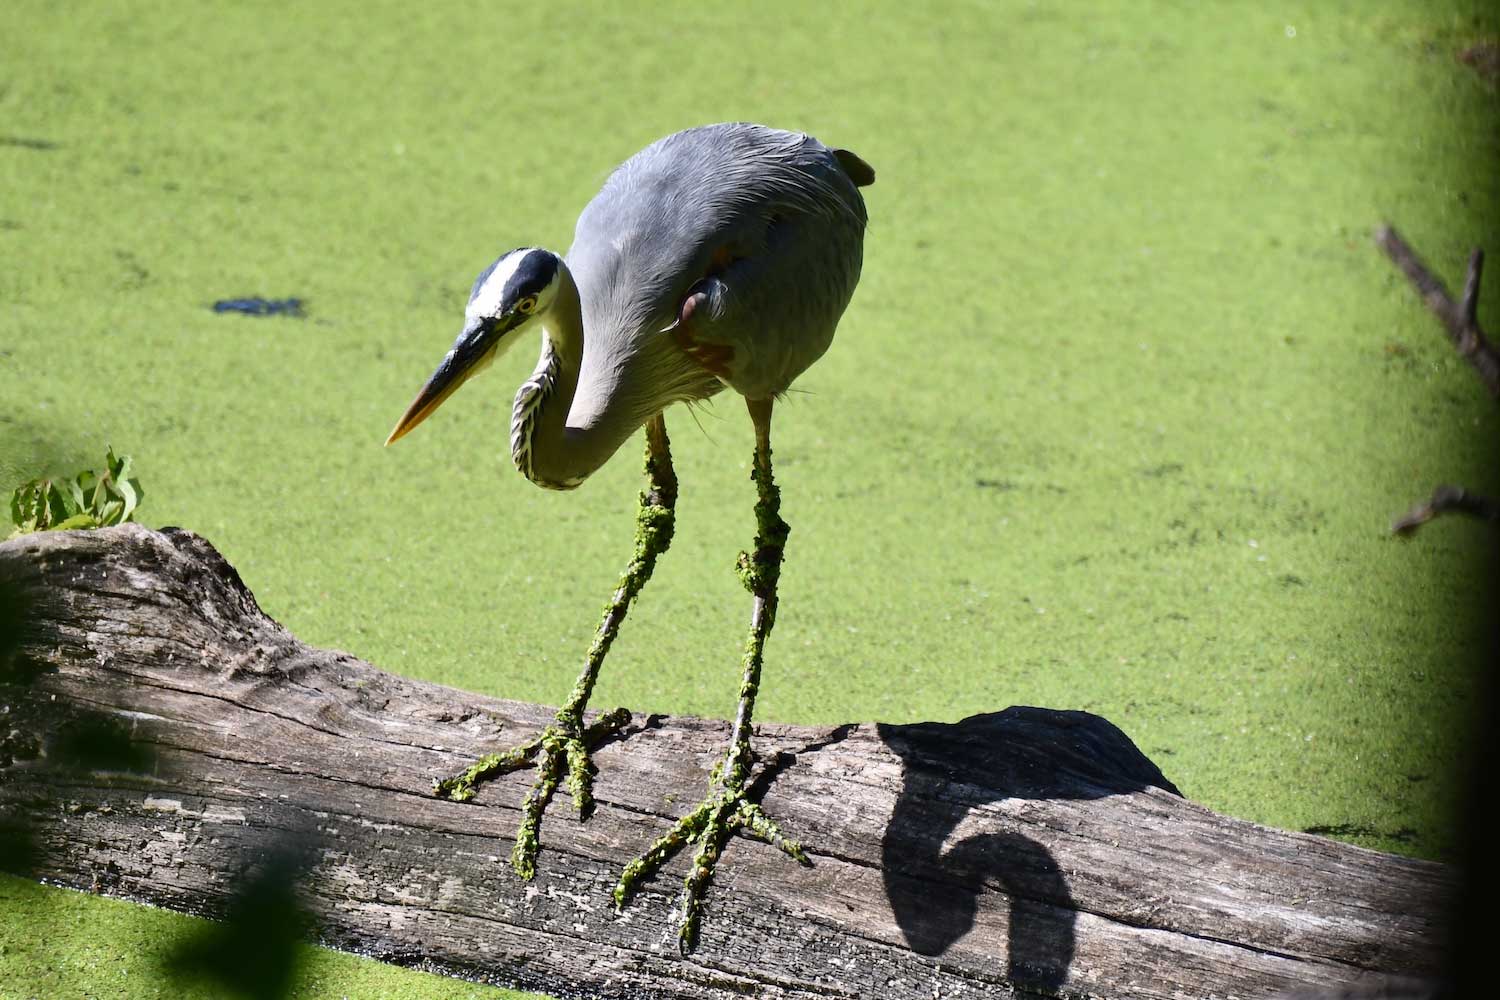 A great blue heron standing on a log in the water.